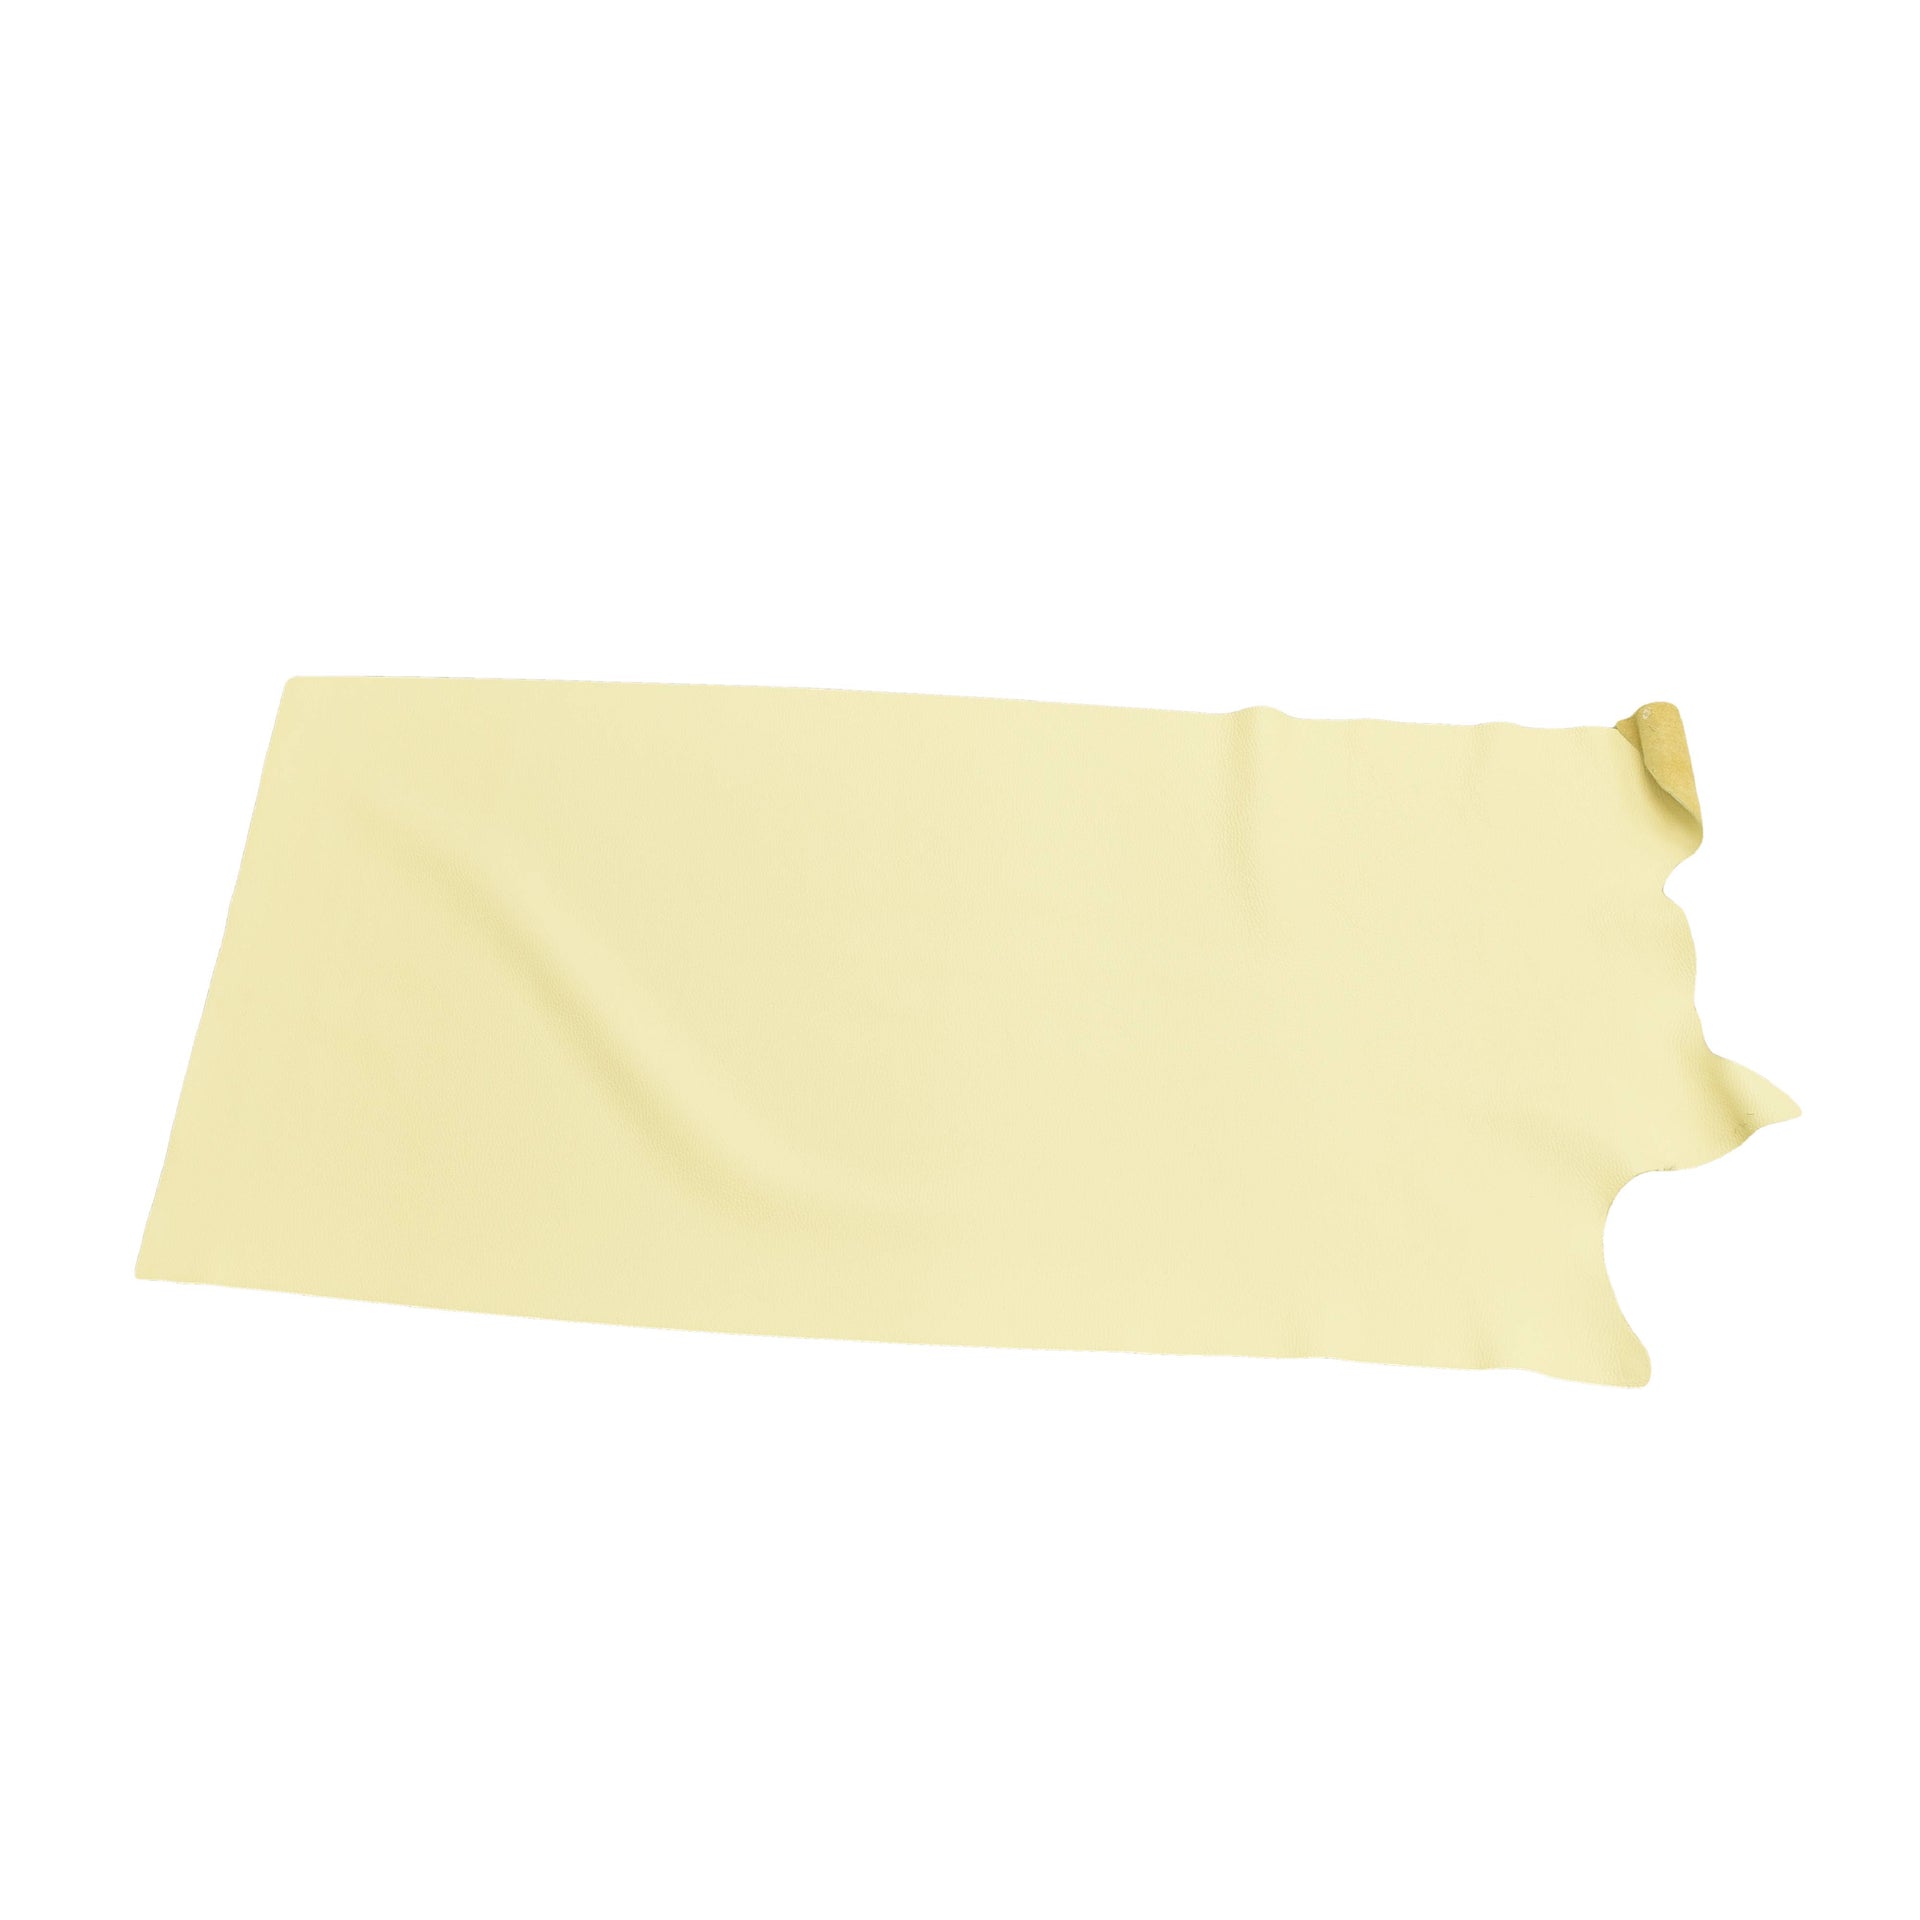 Montana Mellow Yellow Tried n True 3-4 oz Leather Cow Hides, 6.5-7.5 Square Foot / Project Piece (Middle) | The Leather Guy